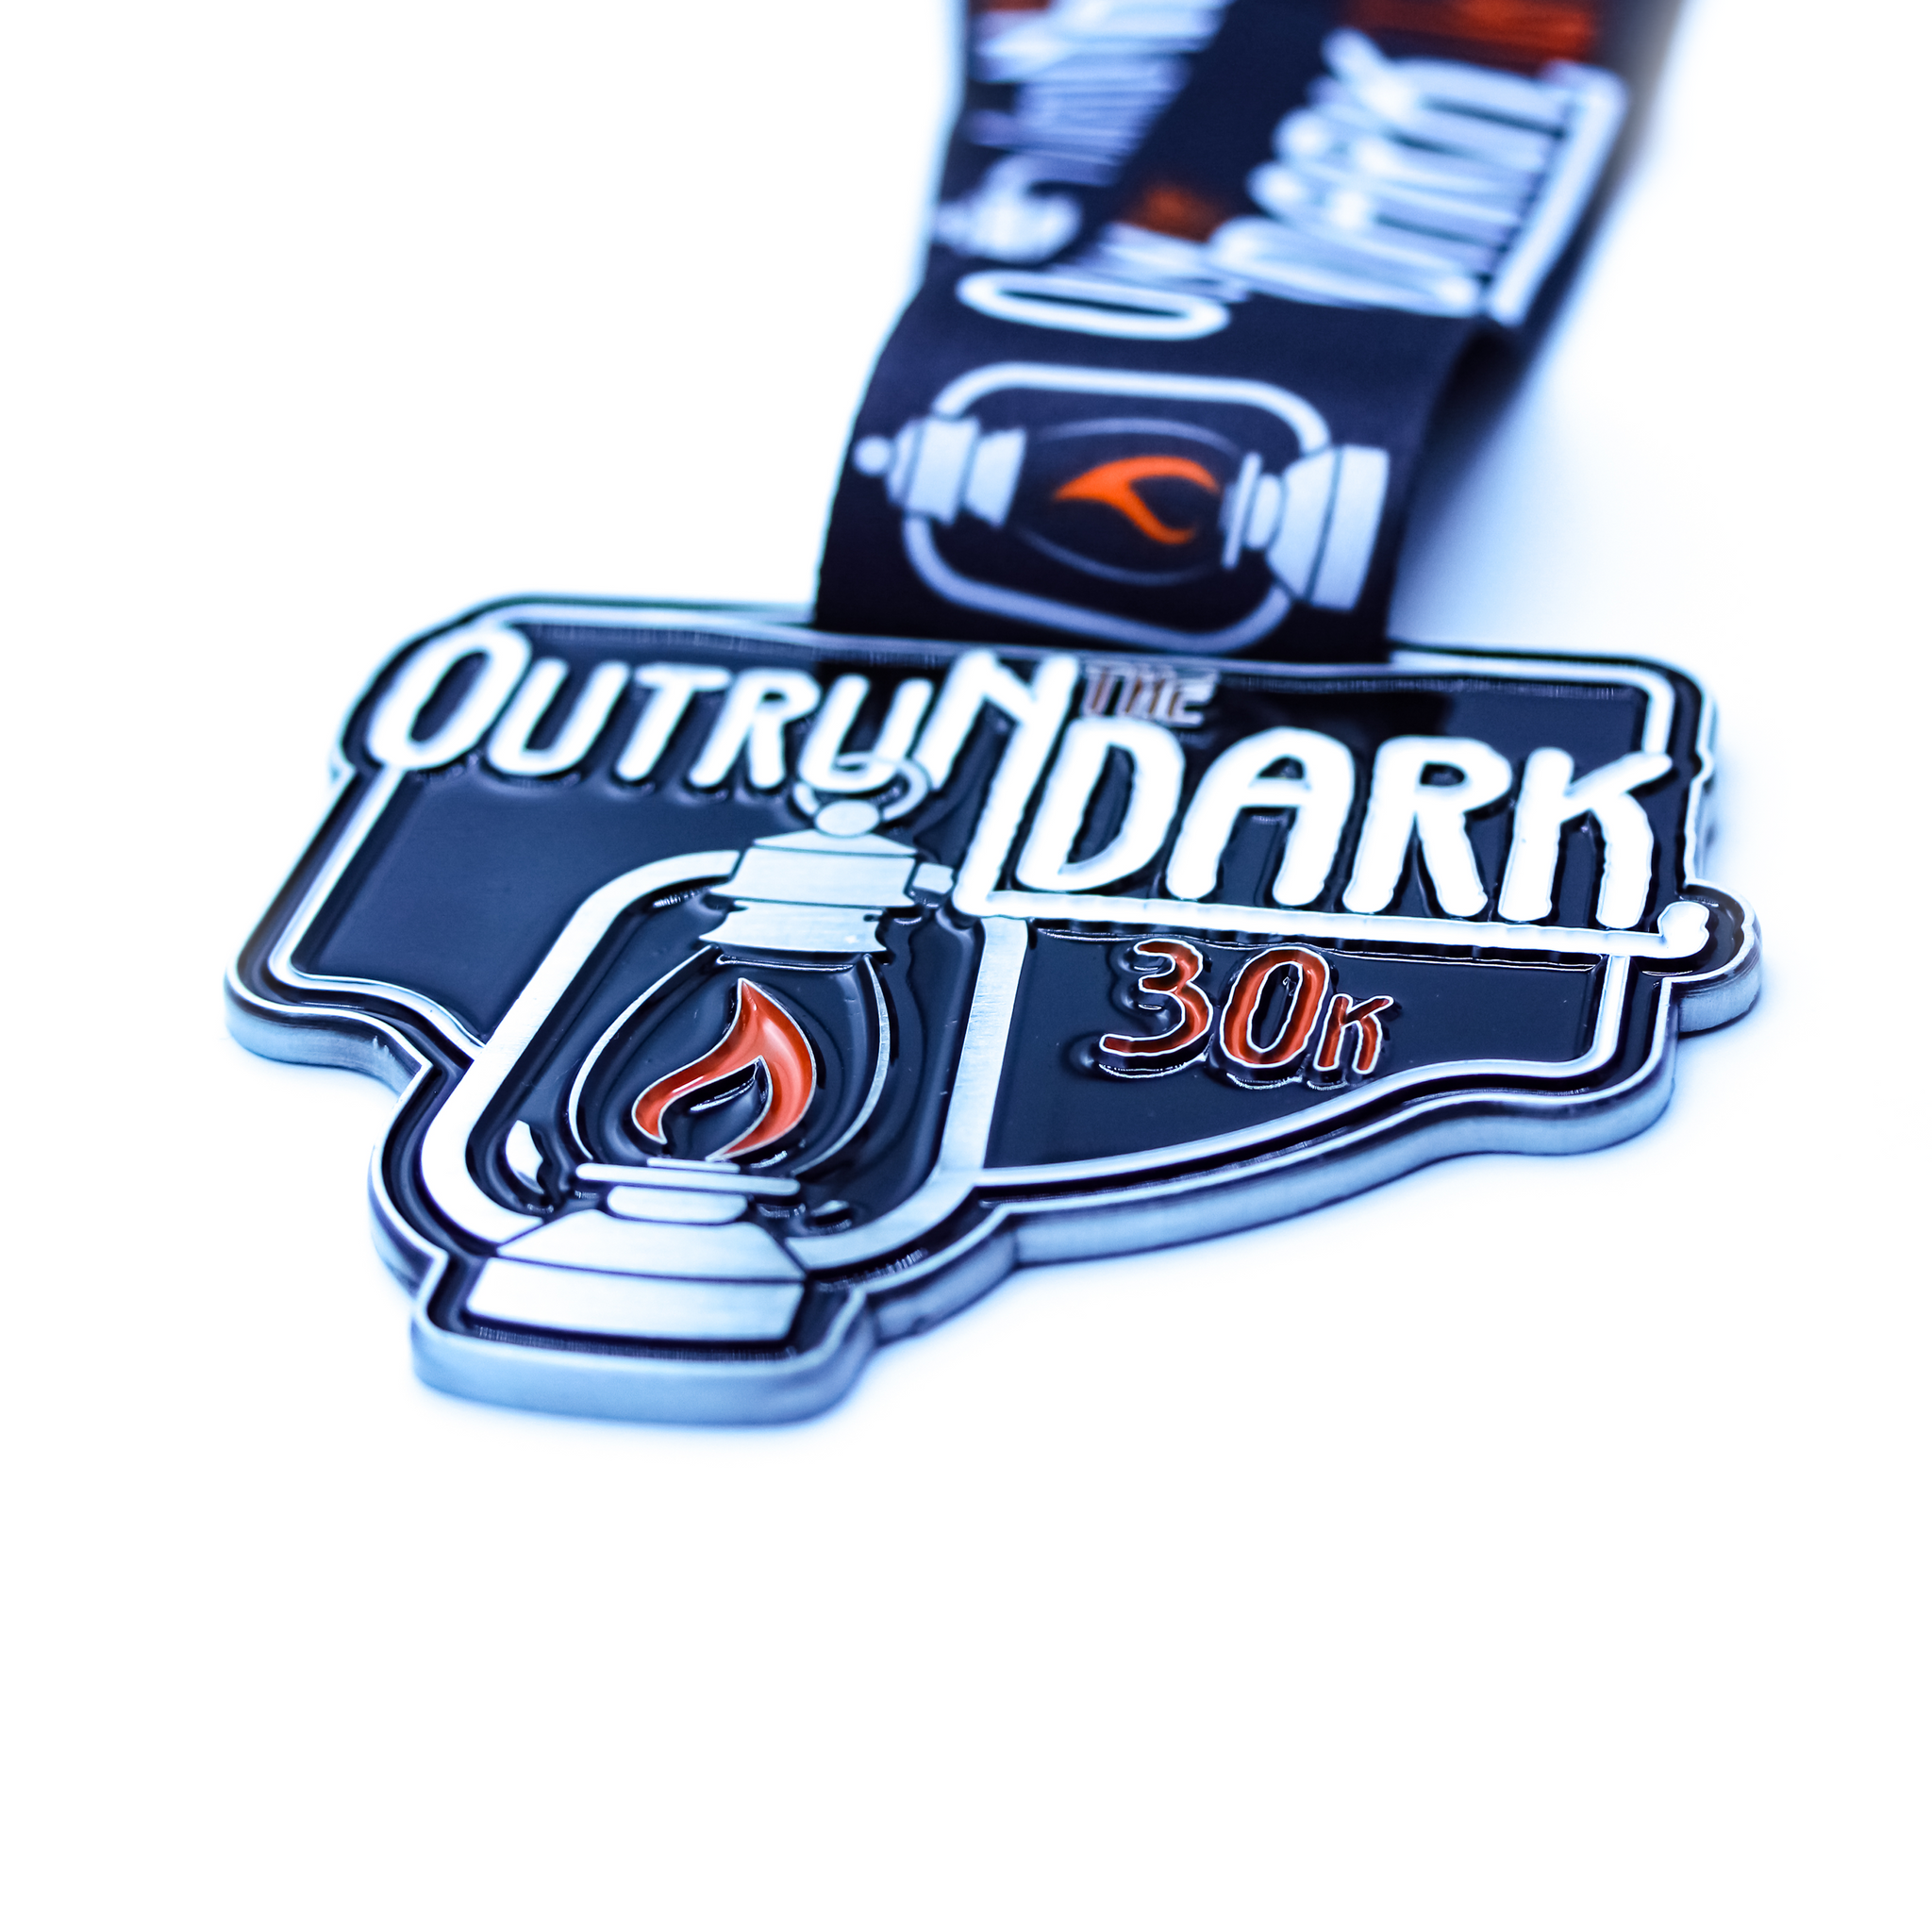 Outrun the Dark Challenge - Entry + Medal